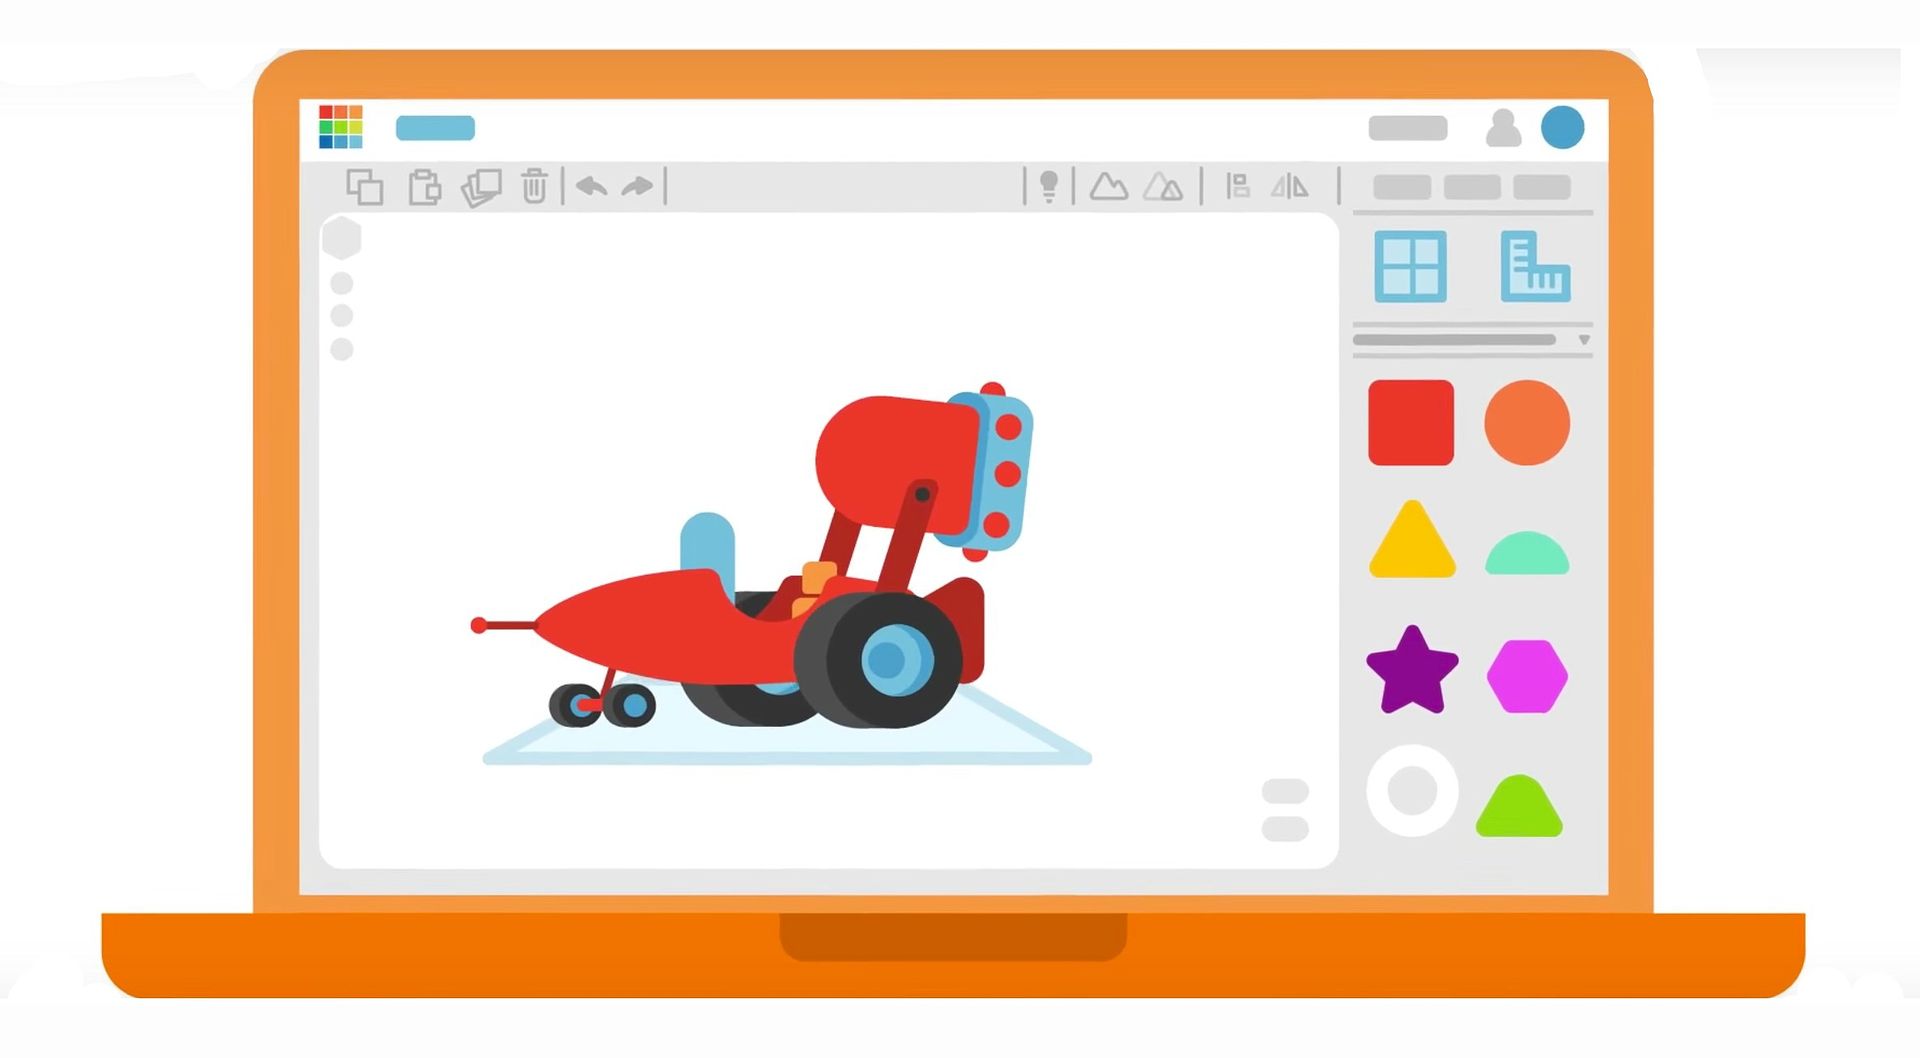 Tinkercad: A free, web-based 3D design and modeling tool that's easy for kids to use